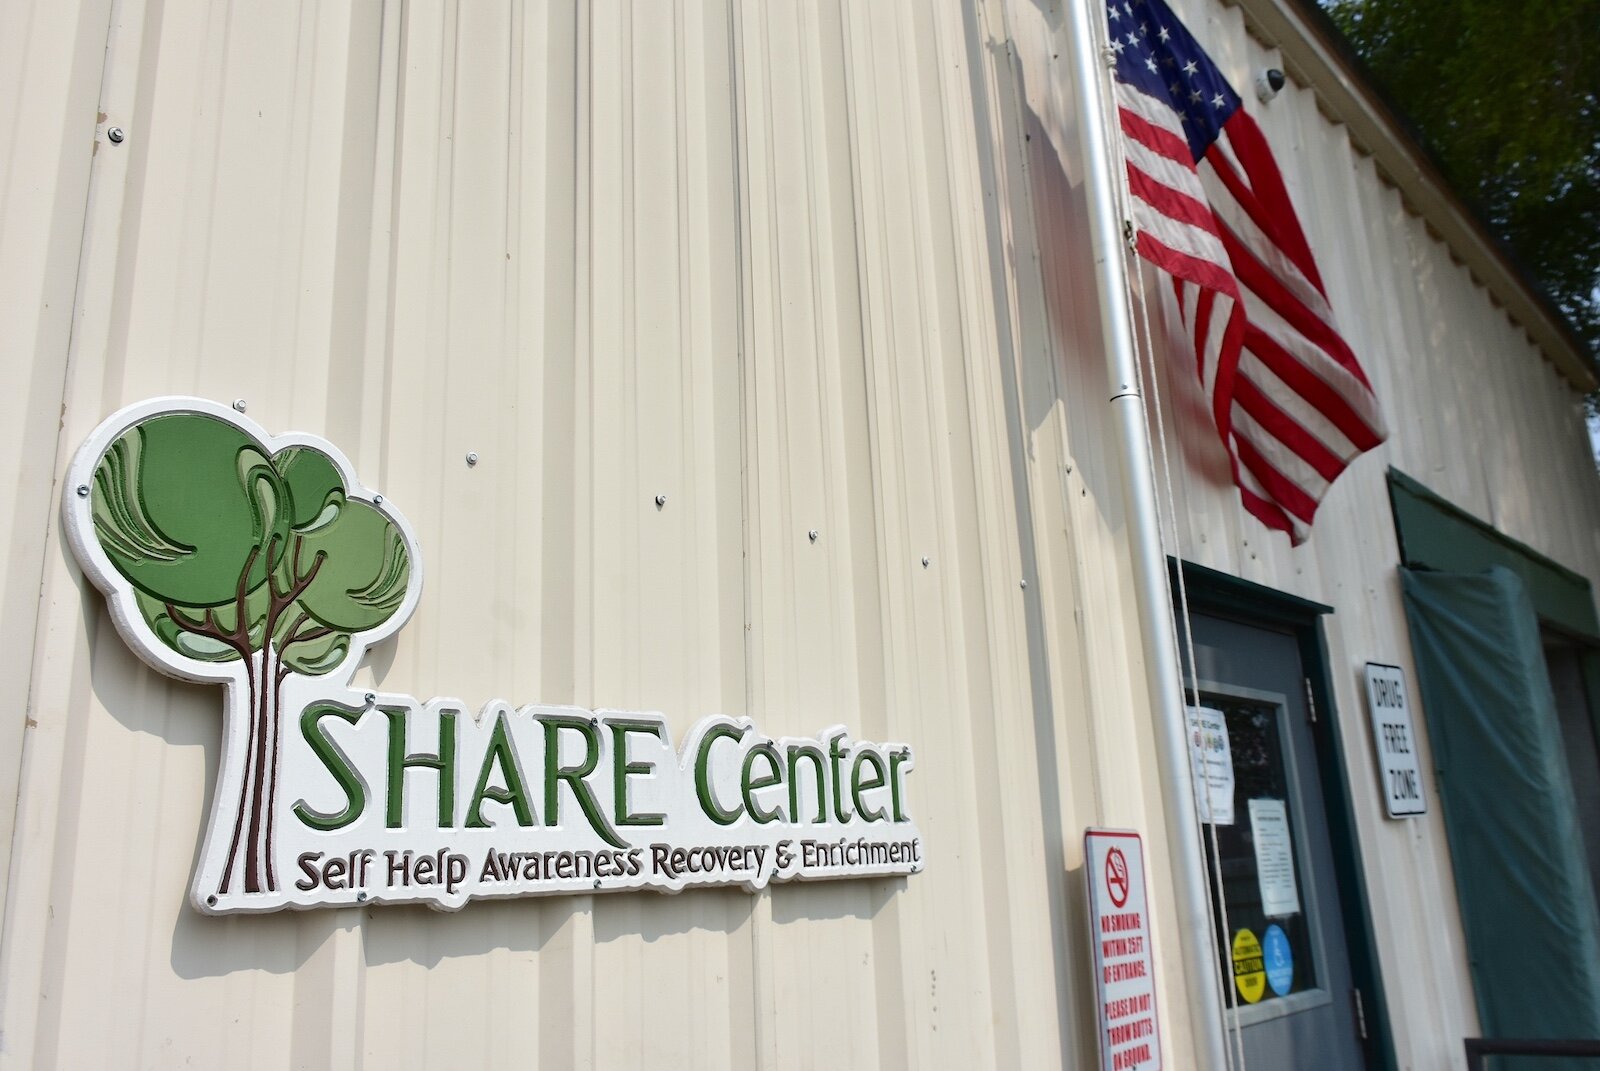 The SHARE Center, near downtown Battle Creek, offers services that help people overcome crises by meeting basic needs, removing barriers, and stabilizing income and housing.